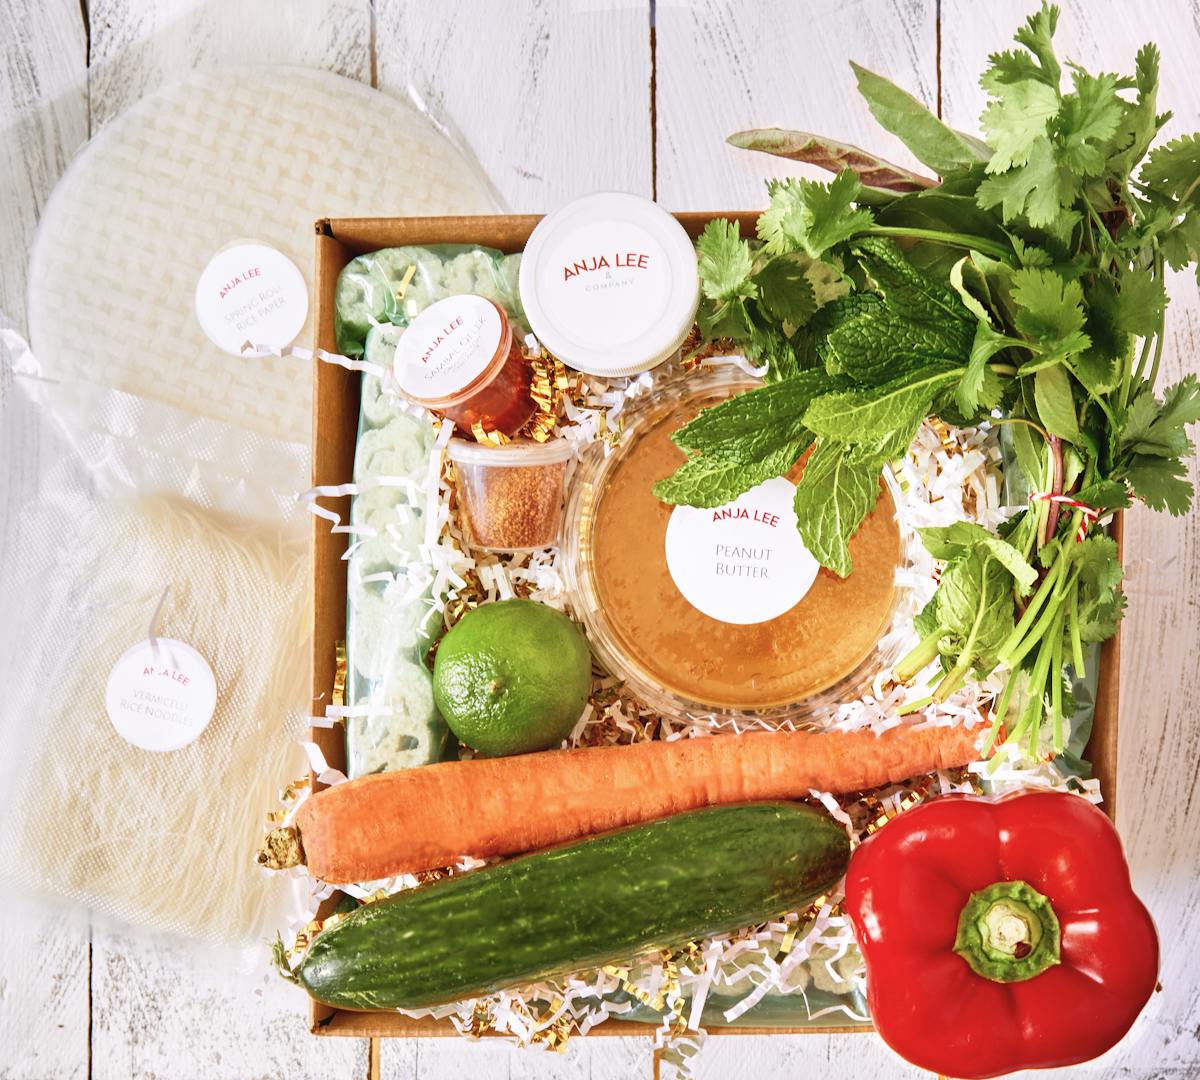 food ingredients packaged in recyclable and compostable packaging